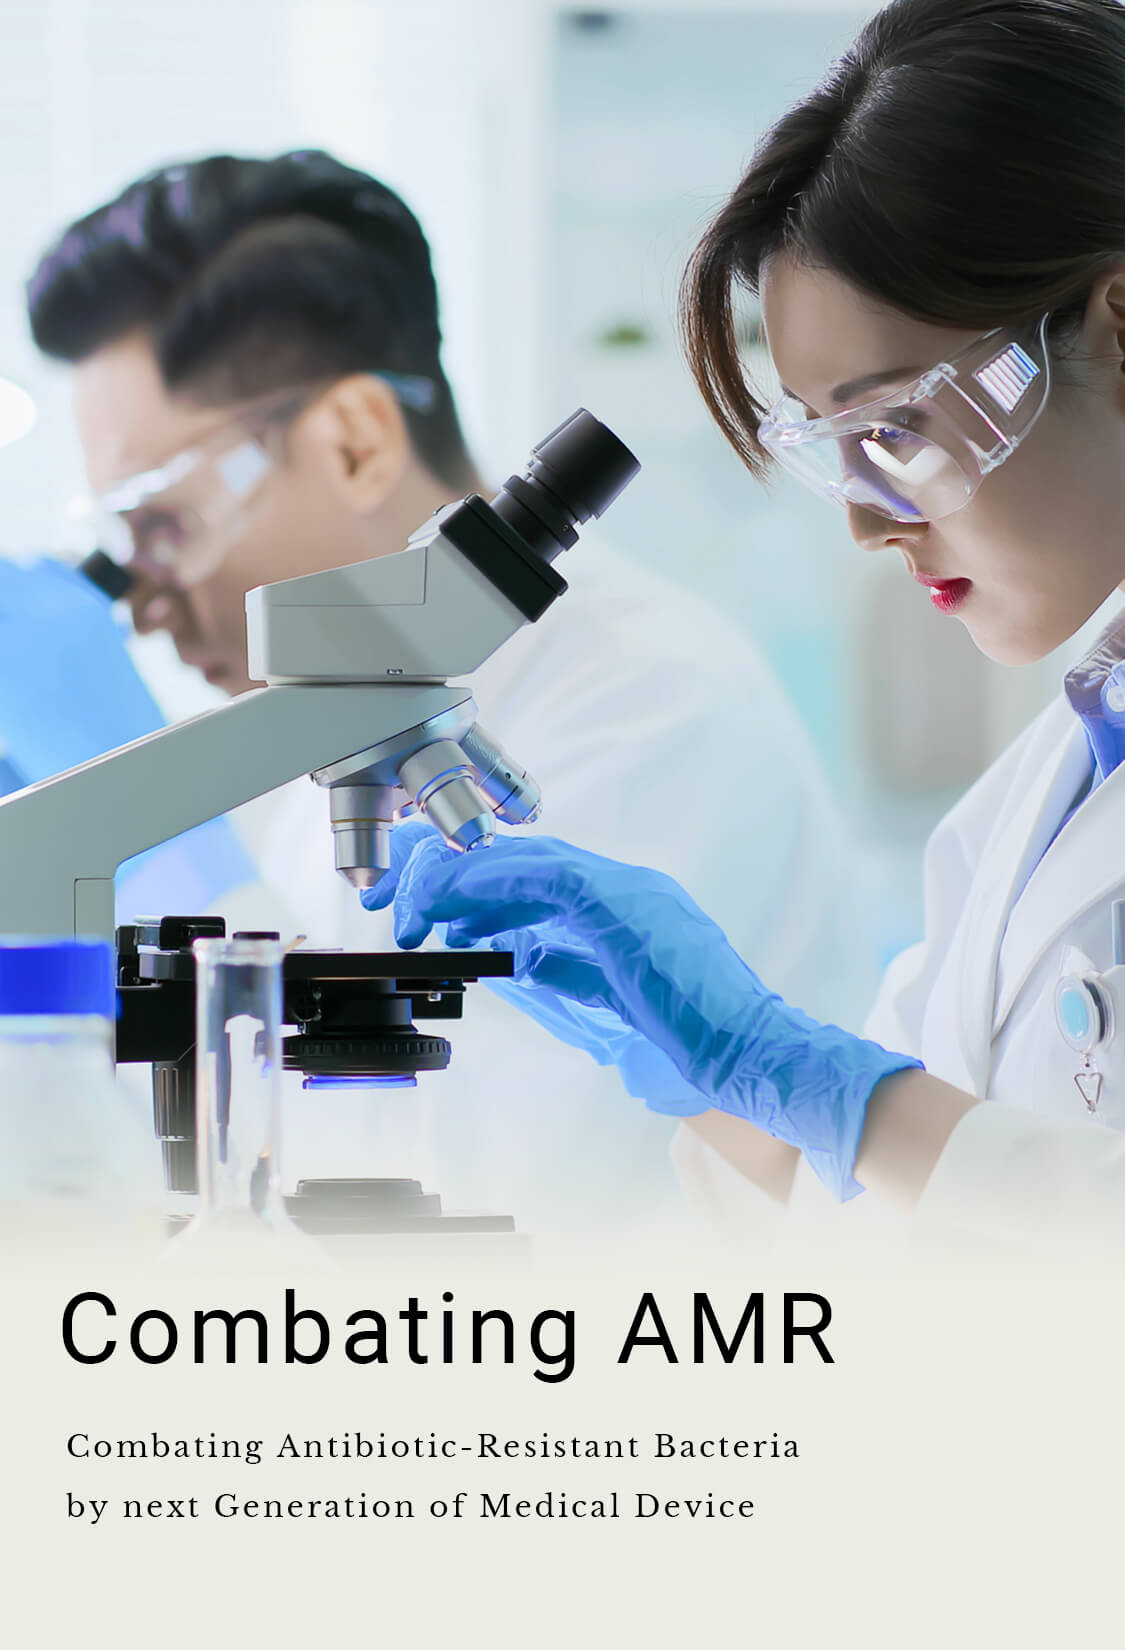 Combating AMR